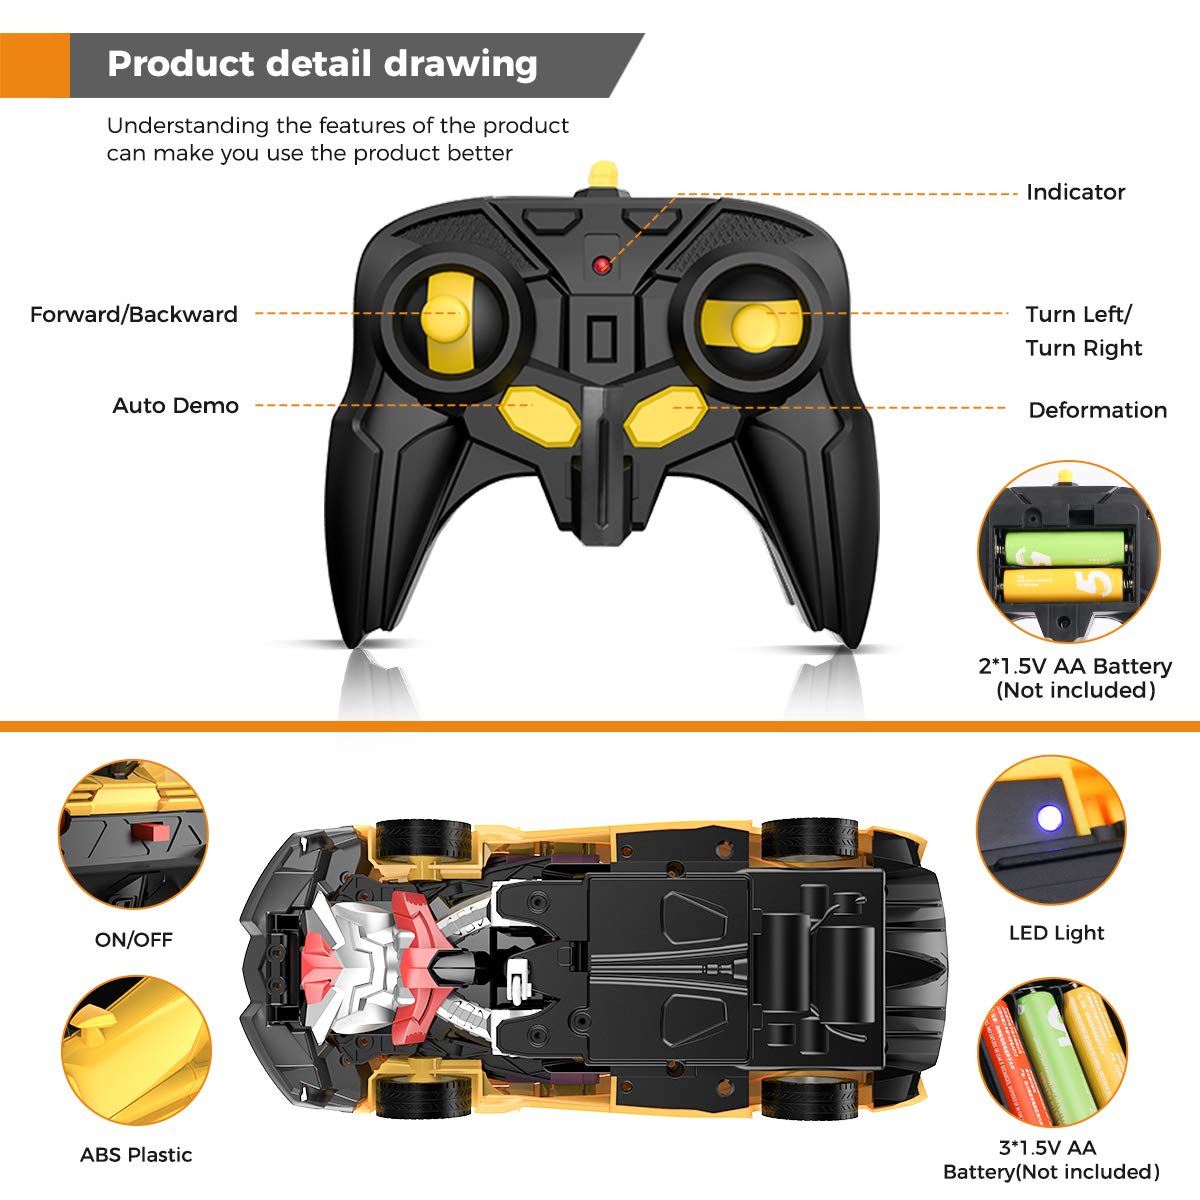 Desuccus Remote Control Car, Transform Robot RC Cars for Kids Toys, 2.4Ghz 1:18 Scale Racing Car with One-Button Deformation, 360°Drifting, Transforming Robot Car Toy for Boys Girls